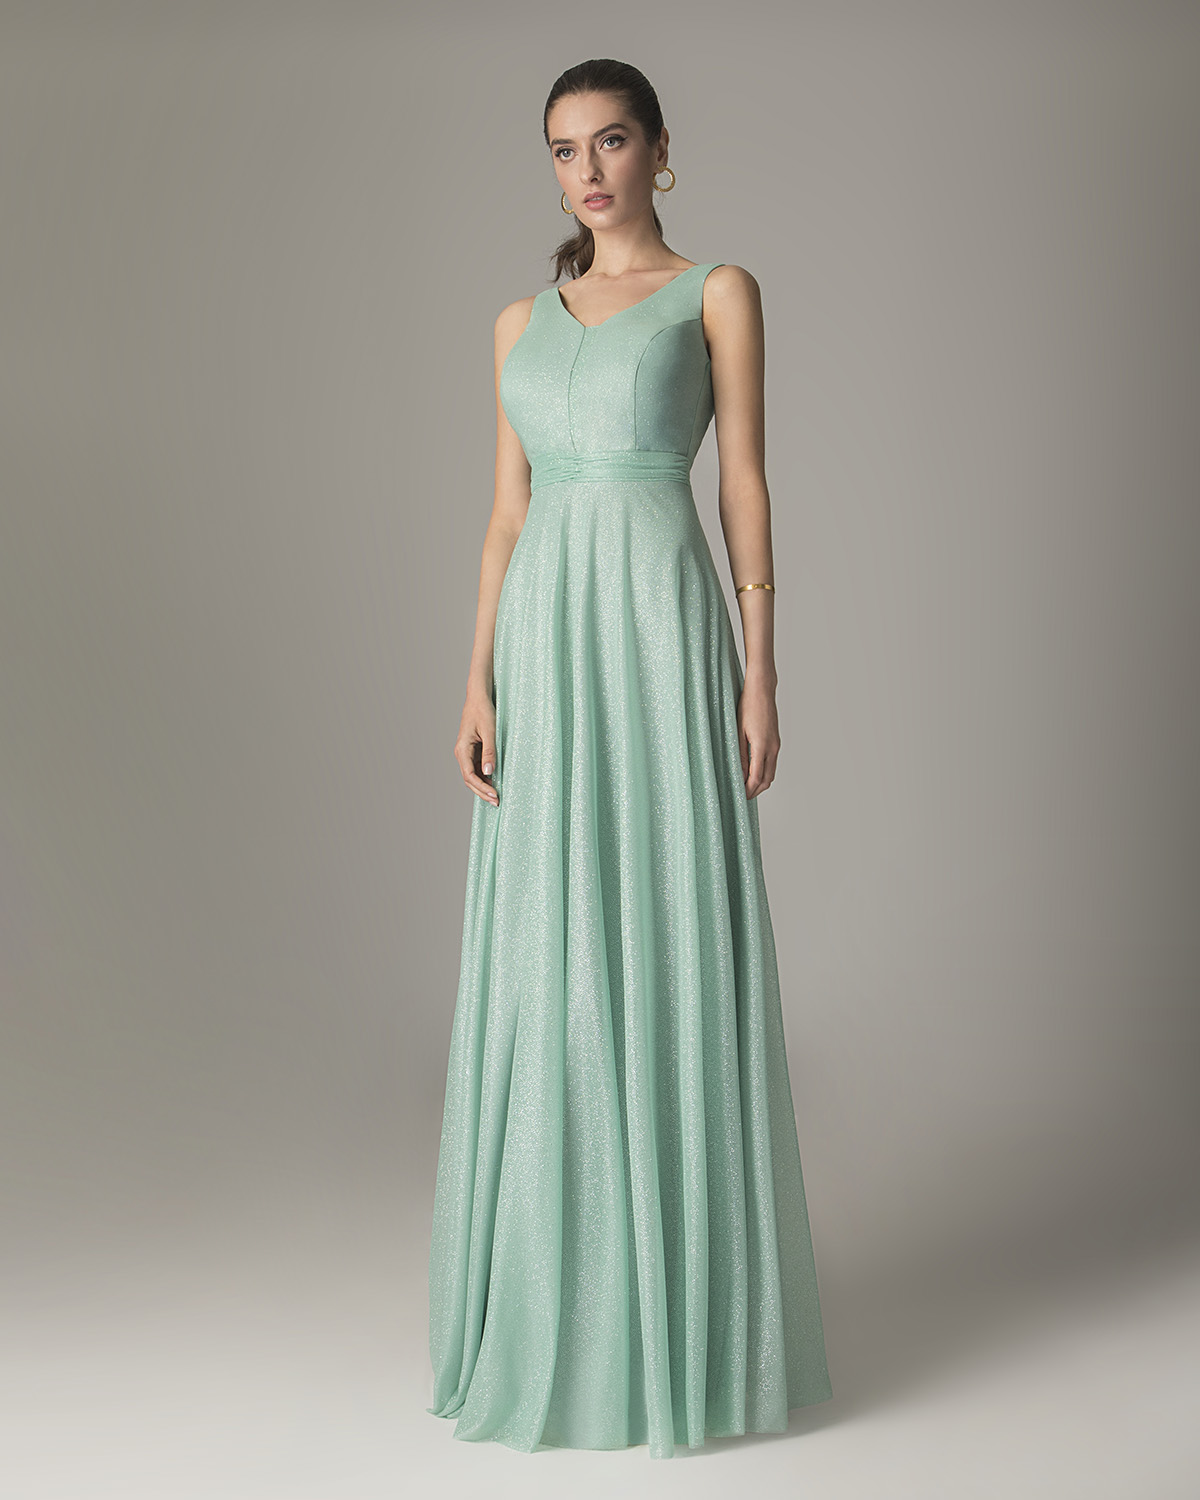 Long cocktail dress with shining fabric and wide straps